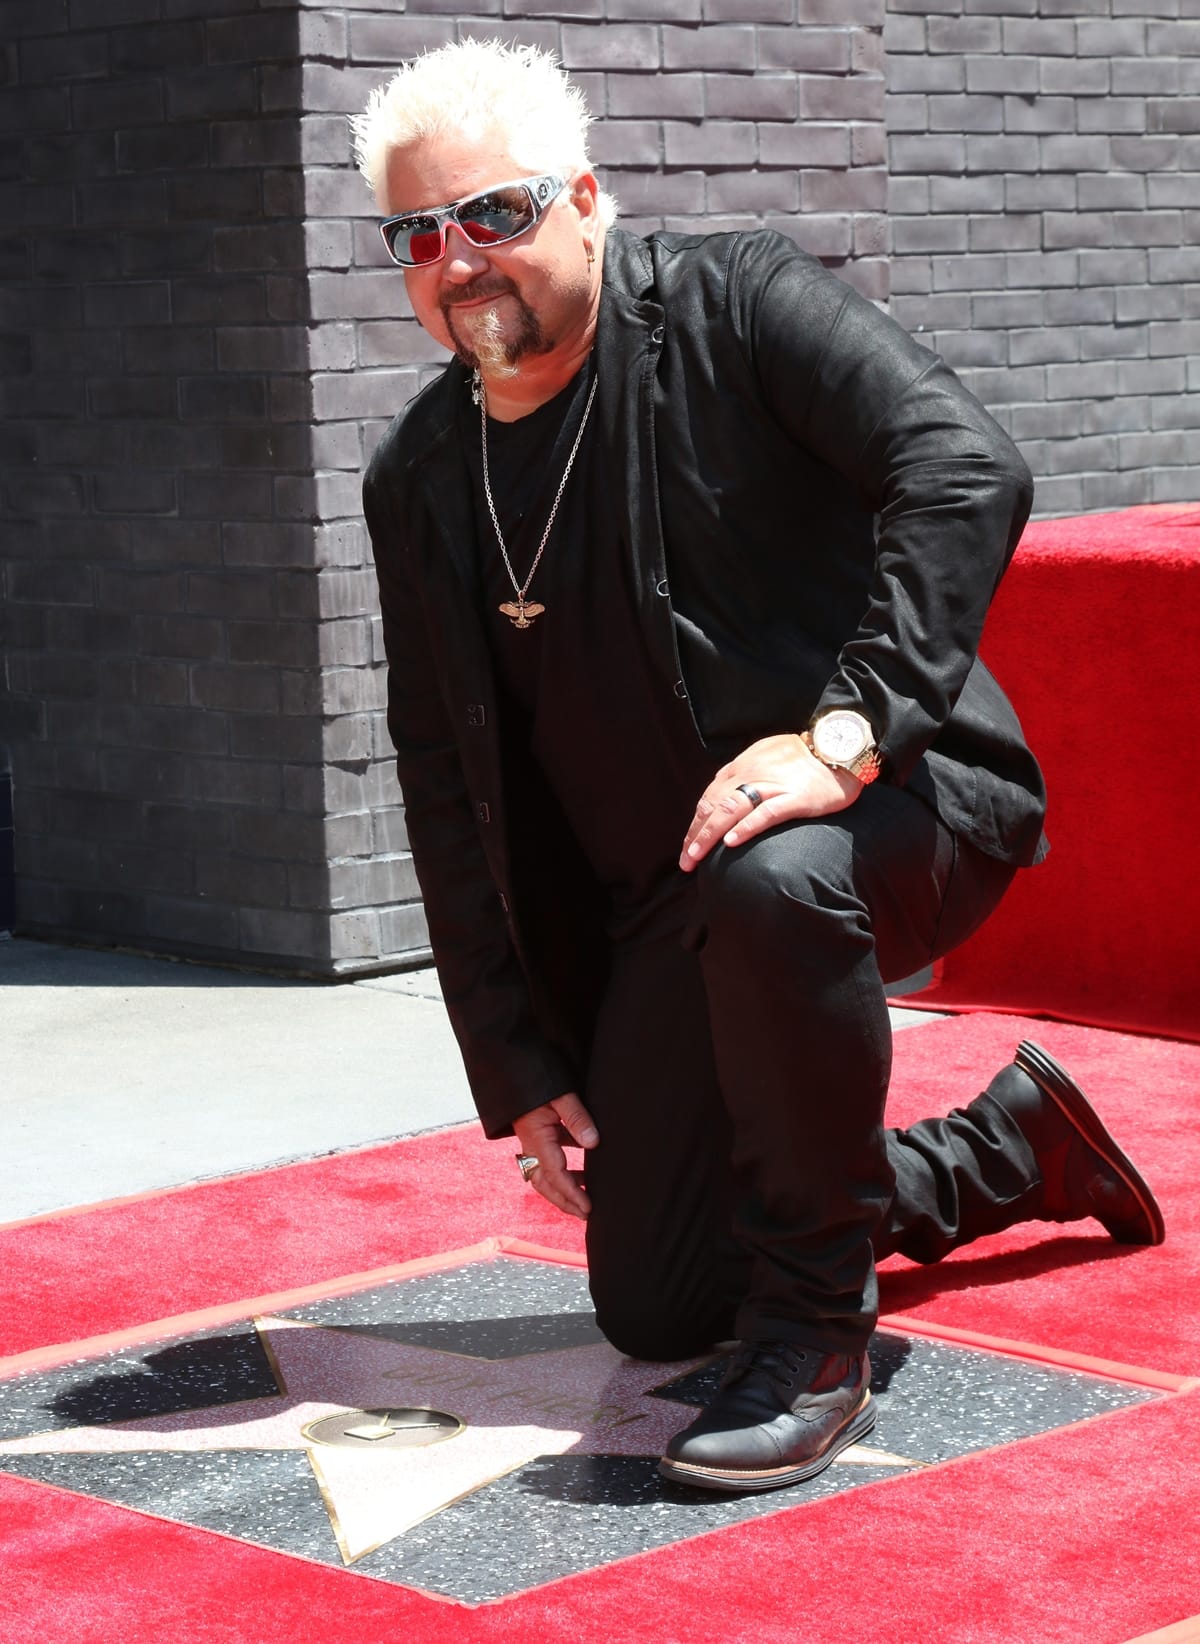 The Hollywood Chamber of Commerce honored wealthy celebrity chef Guy Fieri with the 2,664th star on the Hollywood Walk of Fame